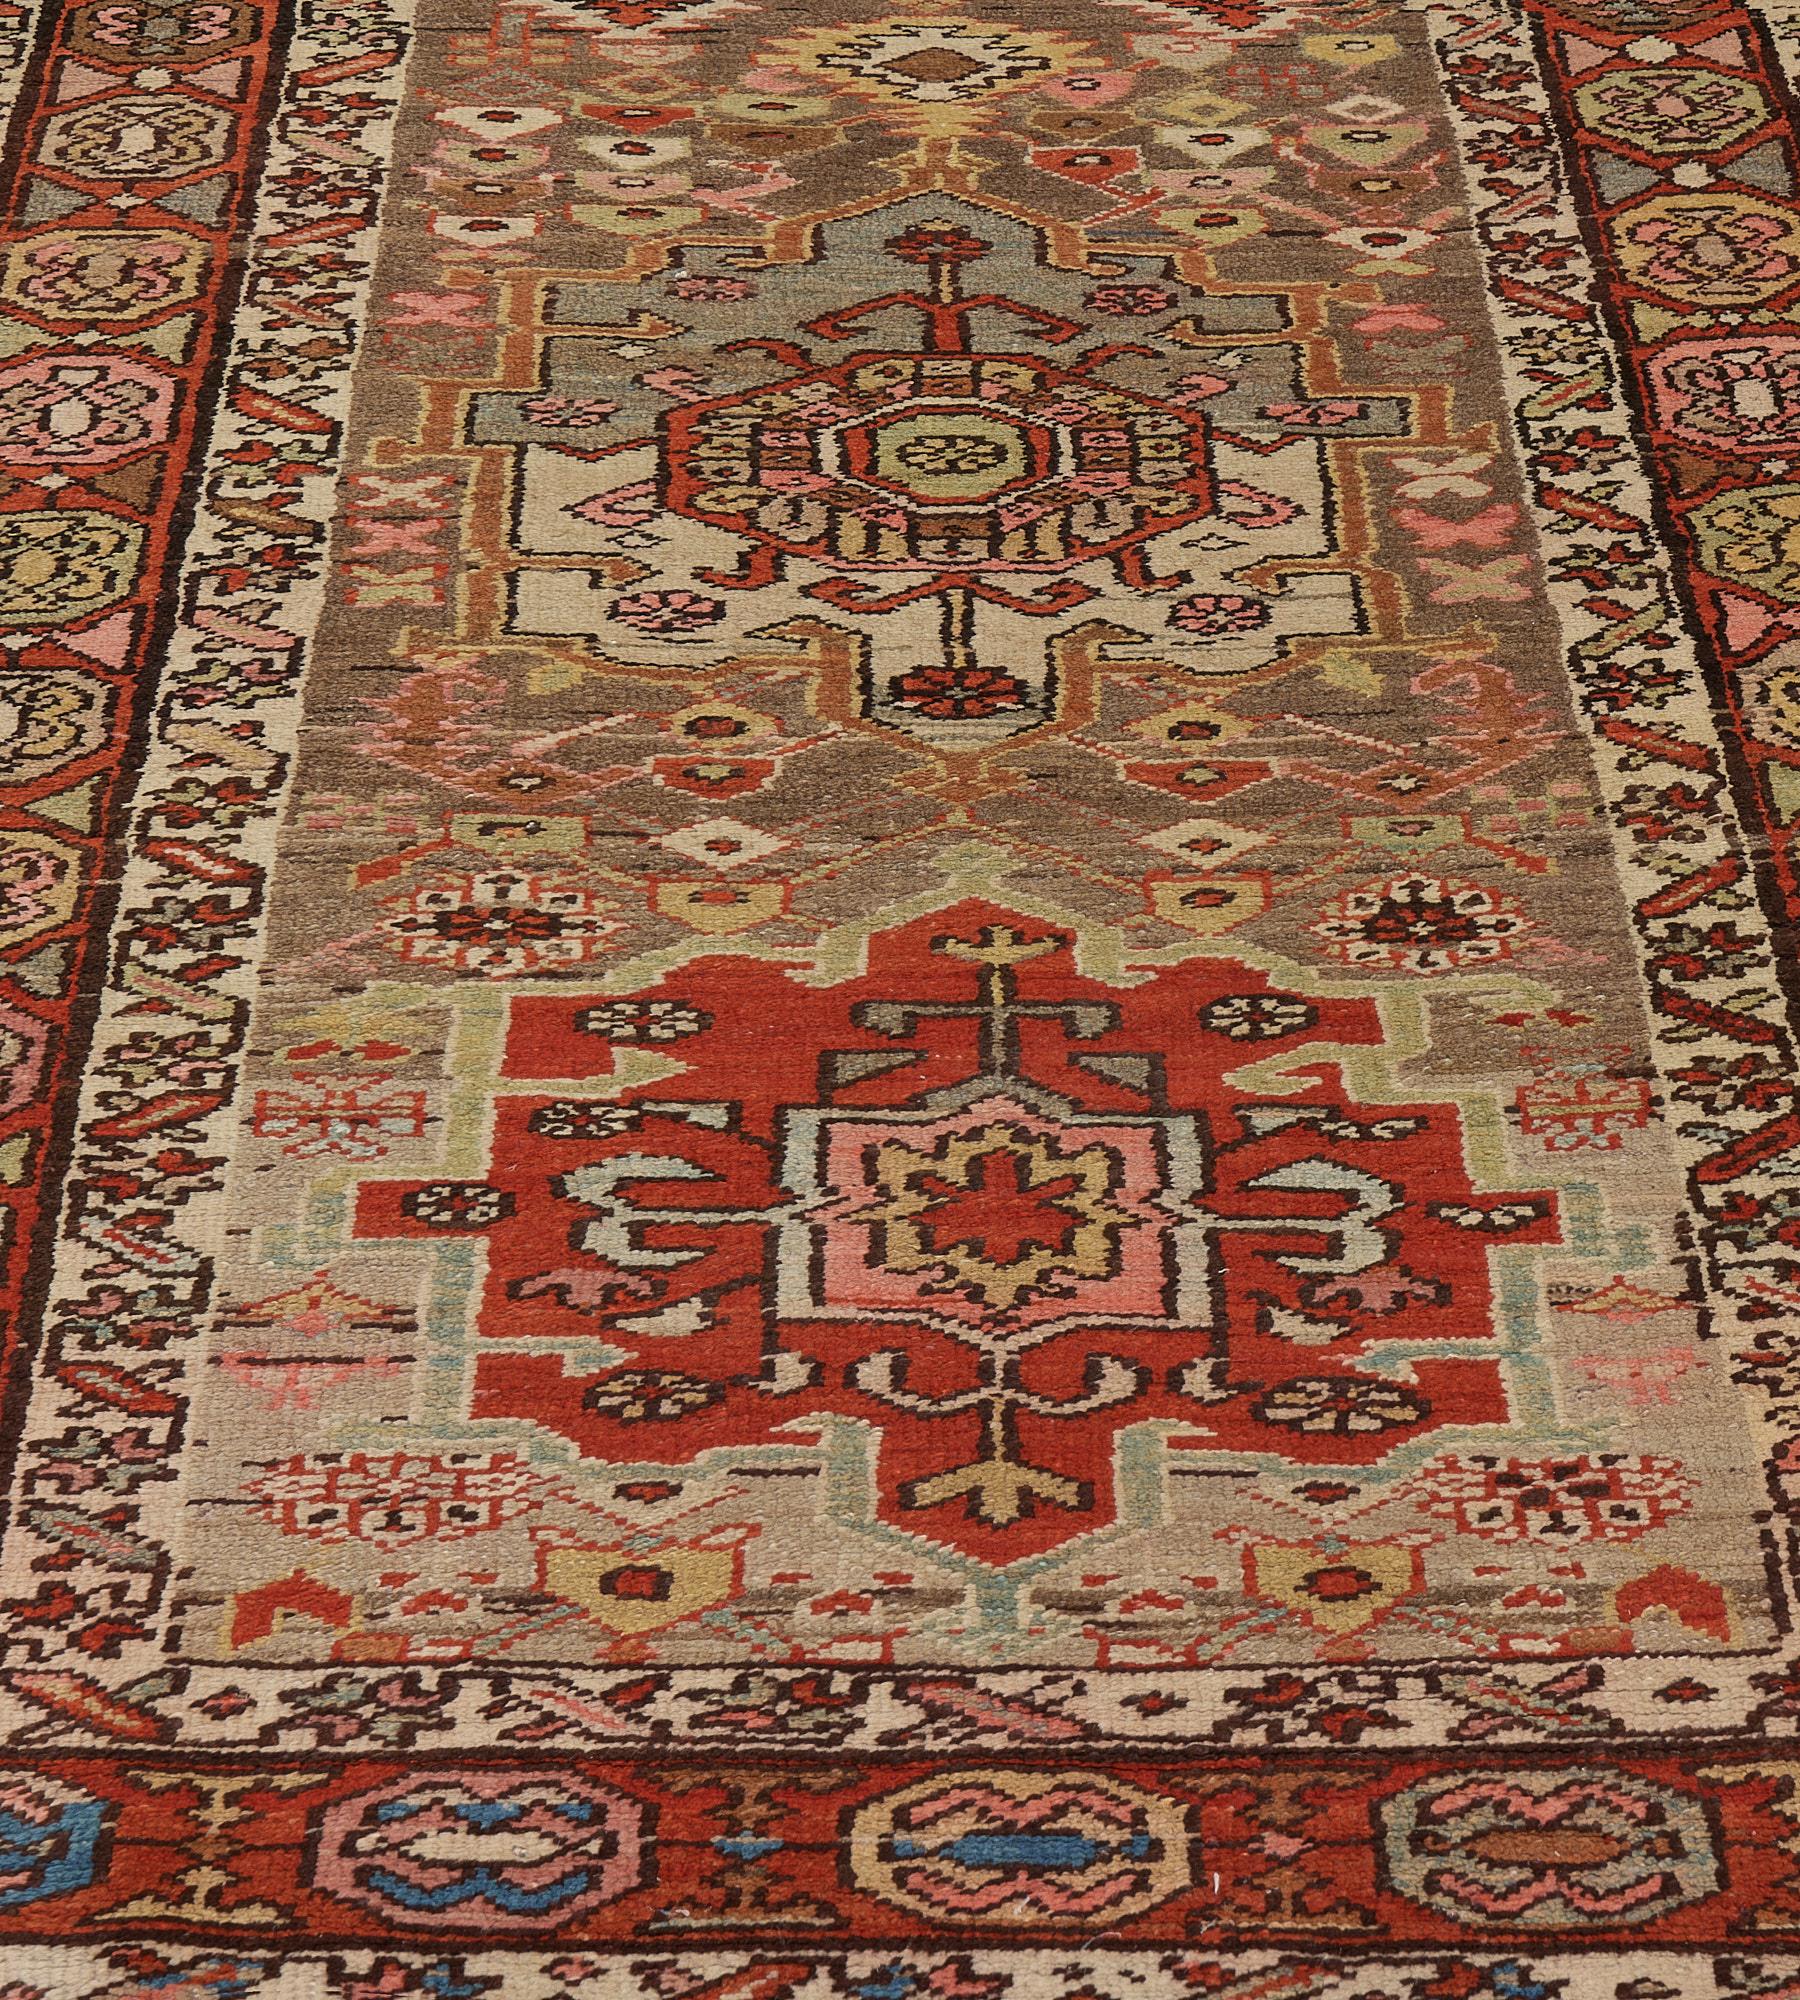 This antique Serab runner features a shaded mole-grey field scattered with polychrome floral motifs and lozenges around a central column of six polychrome shield lozenges each with a central panel containing a floral motif surrounded by various